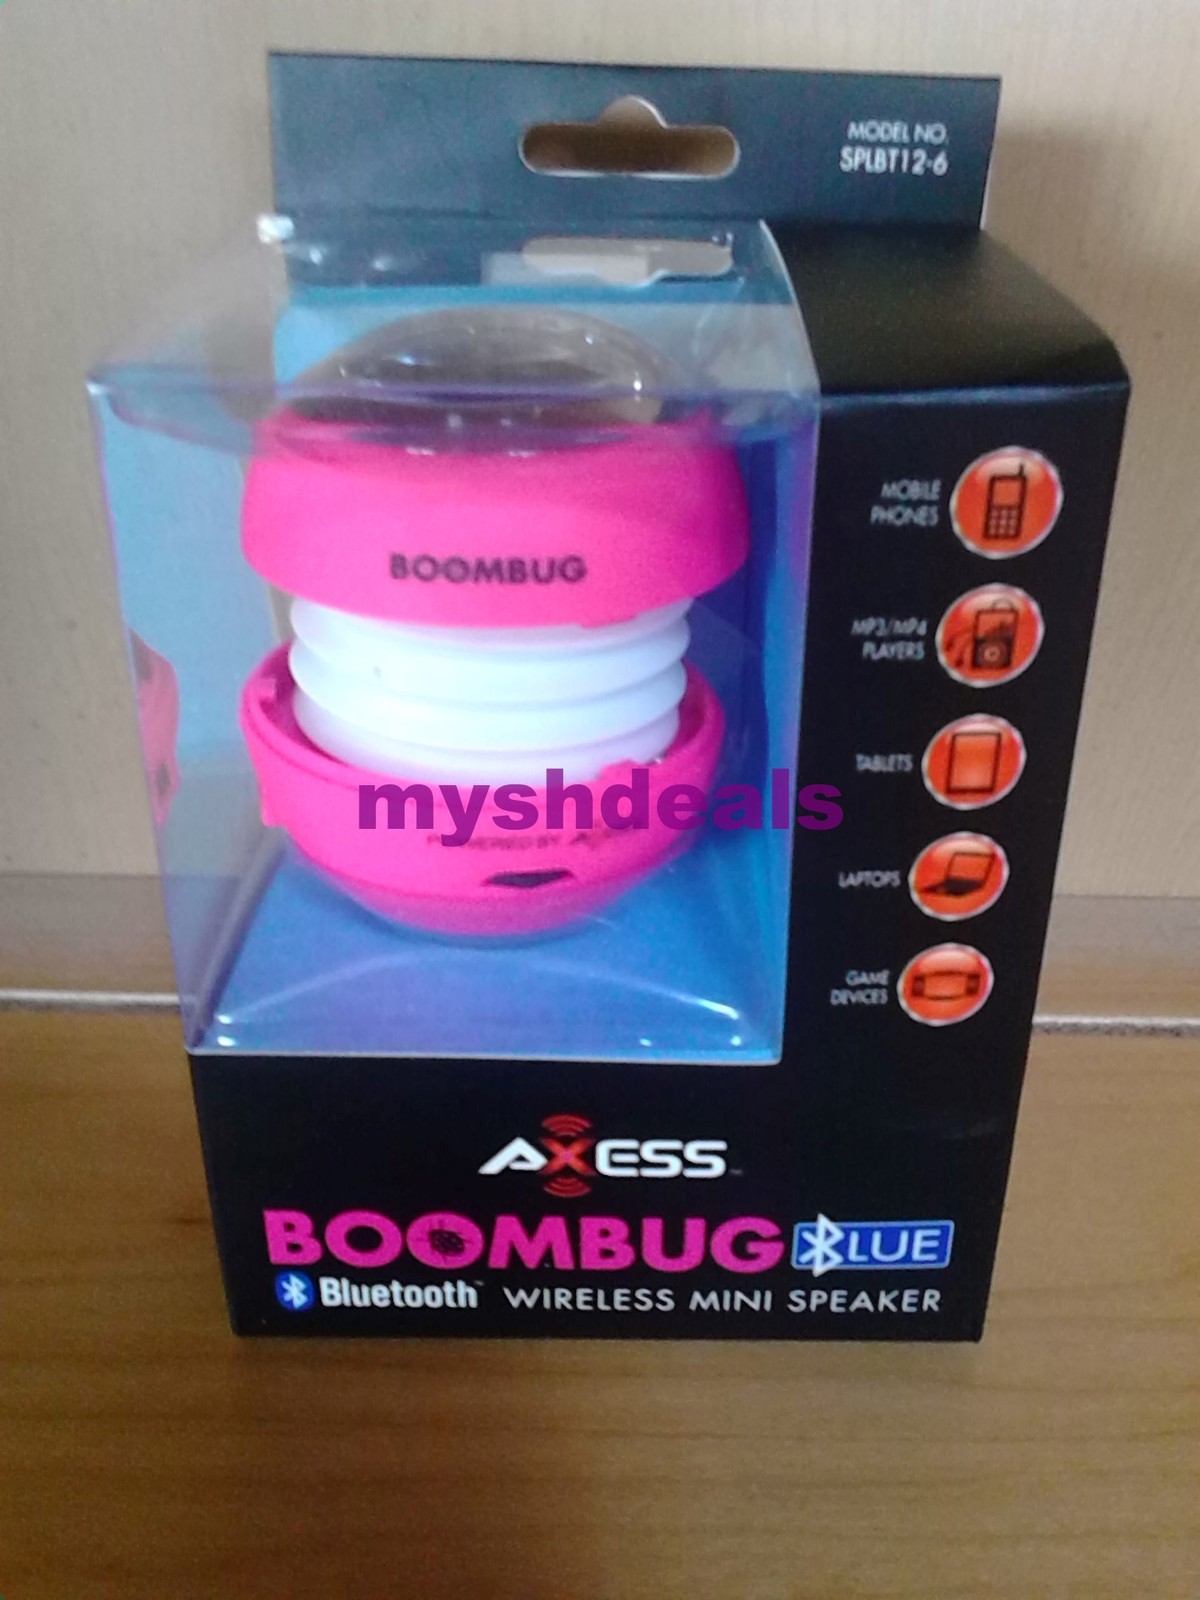 Axess Boombug Portable Speaker - Bluetooth, Wireless Streaming - $13.95